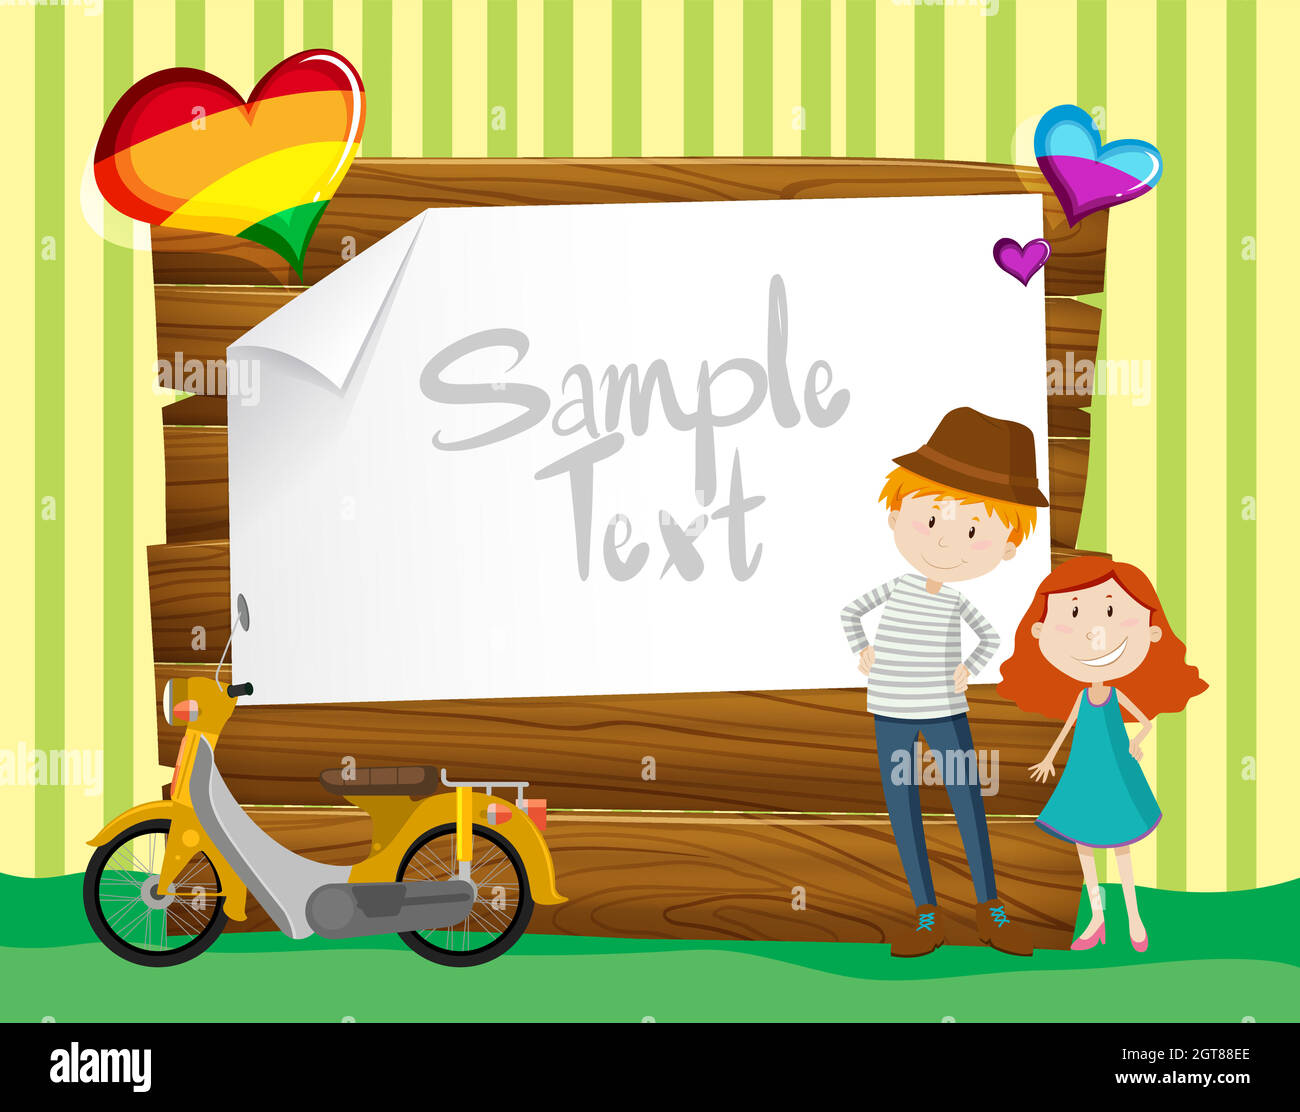 Border design with couple and bike Stock Vector